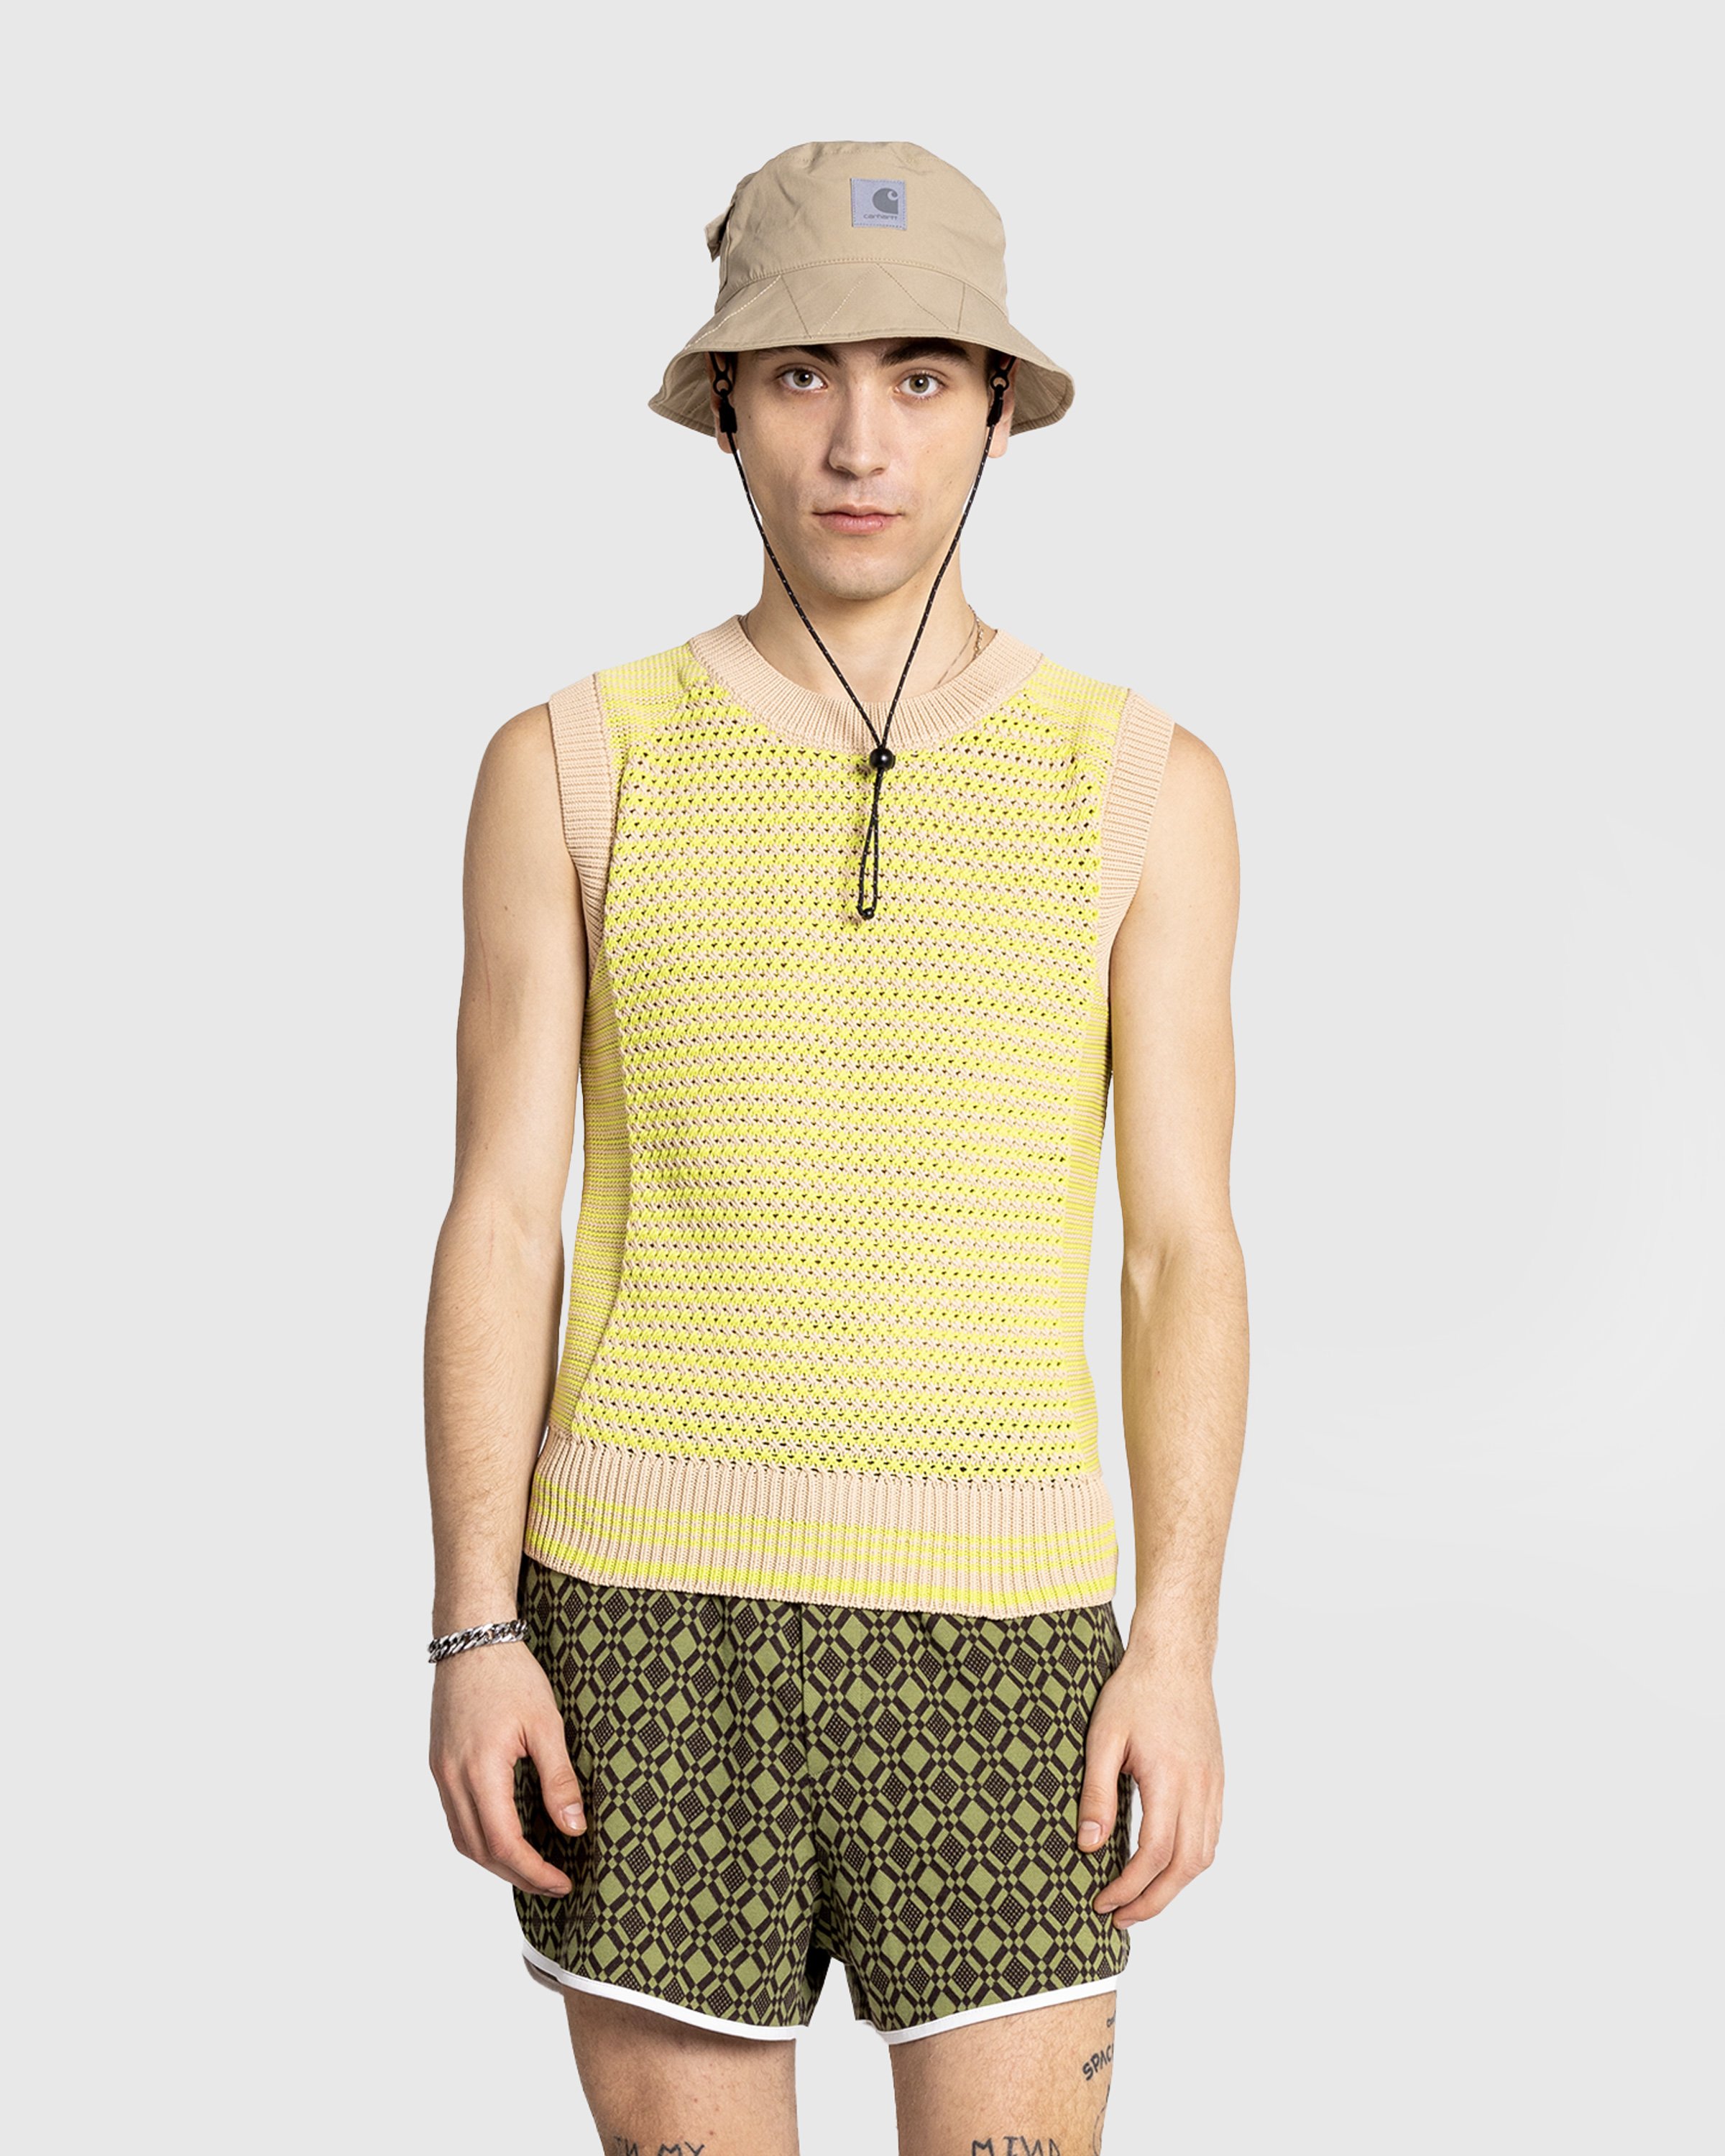 Wales Bonner - Vest Yellow - Clothing - Yellow - Image 2